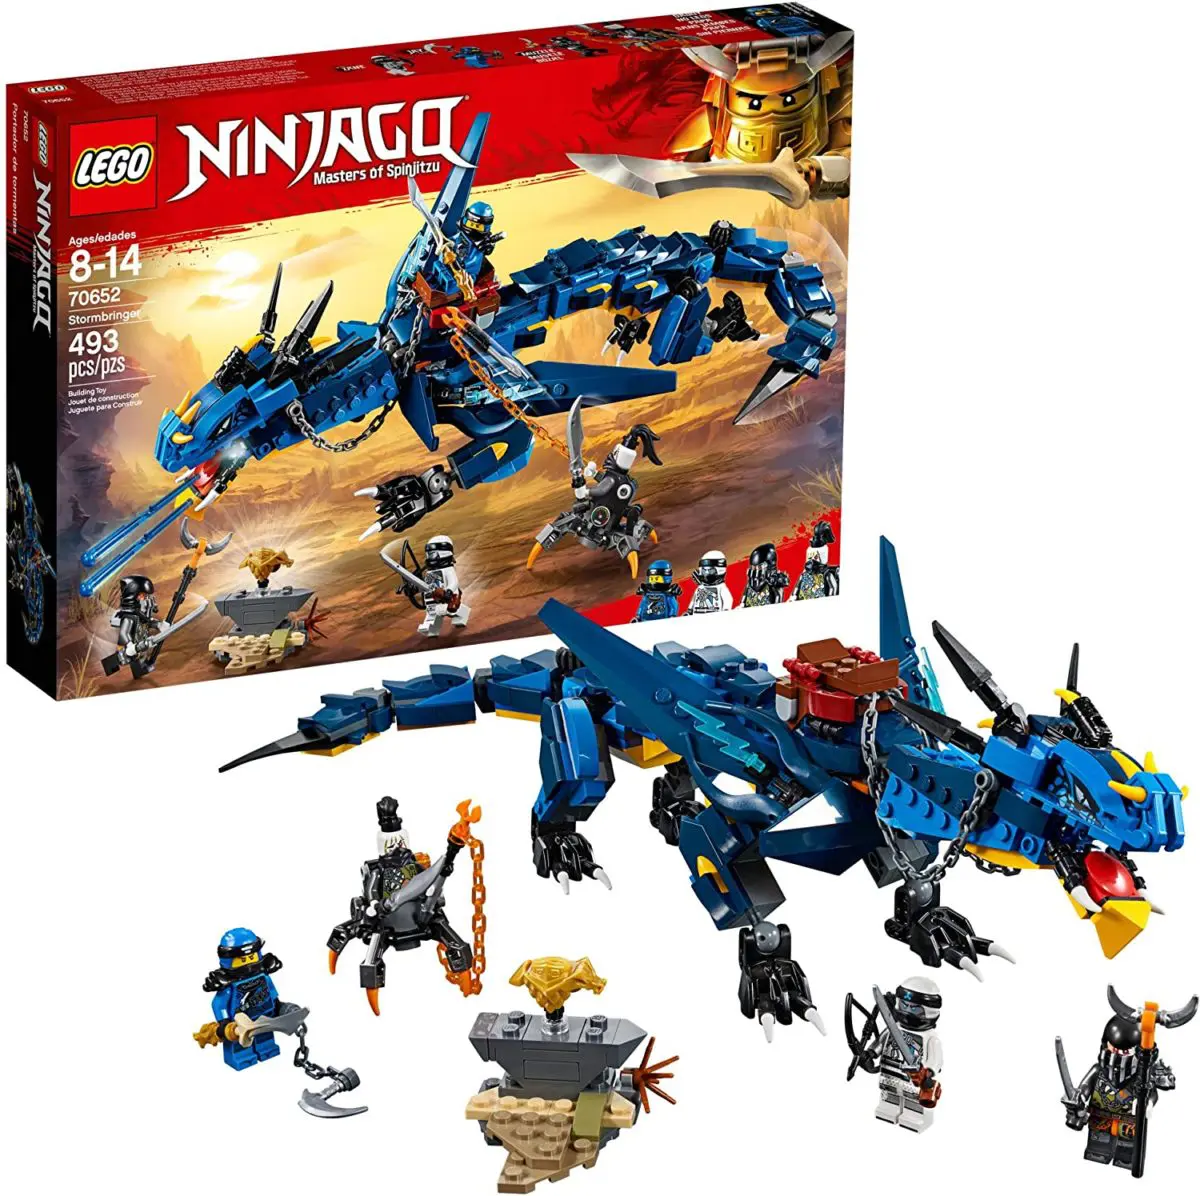 LEGO NINJAGO Masters of Spinjitzu Stormbringer - Top Toys and Gifts for Nine Year Old Boys 1